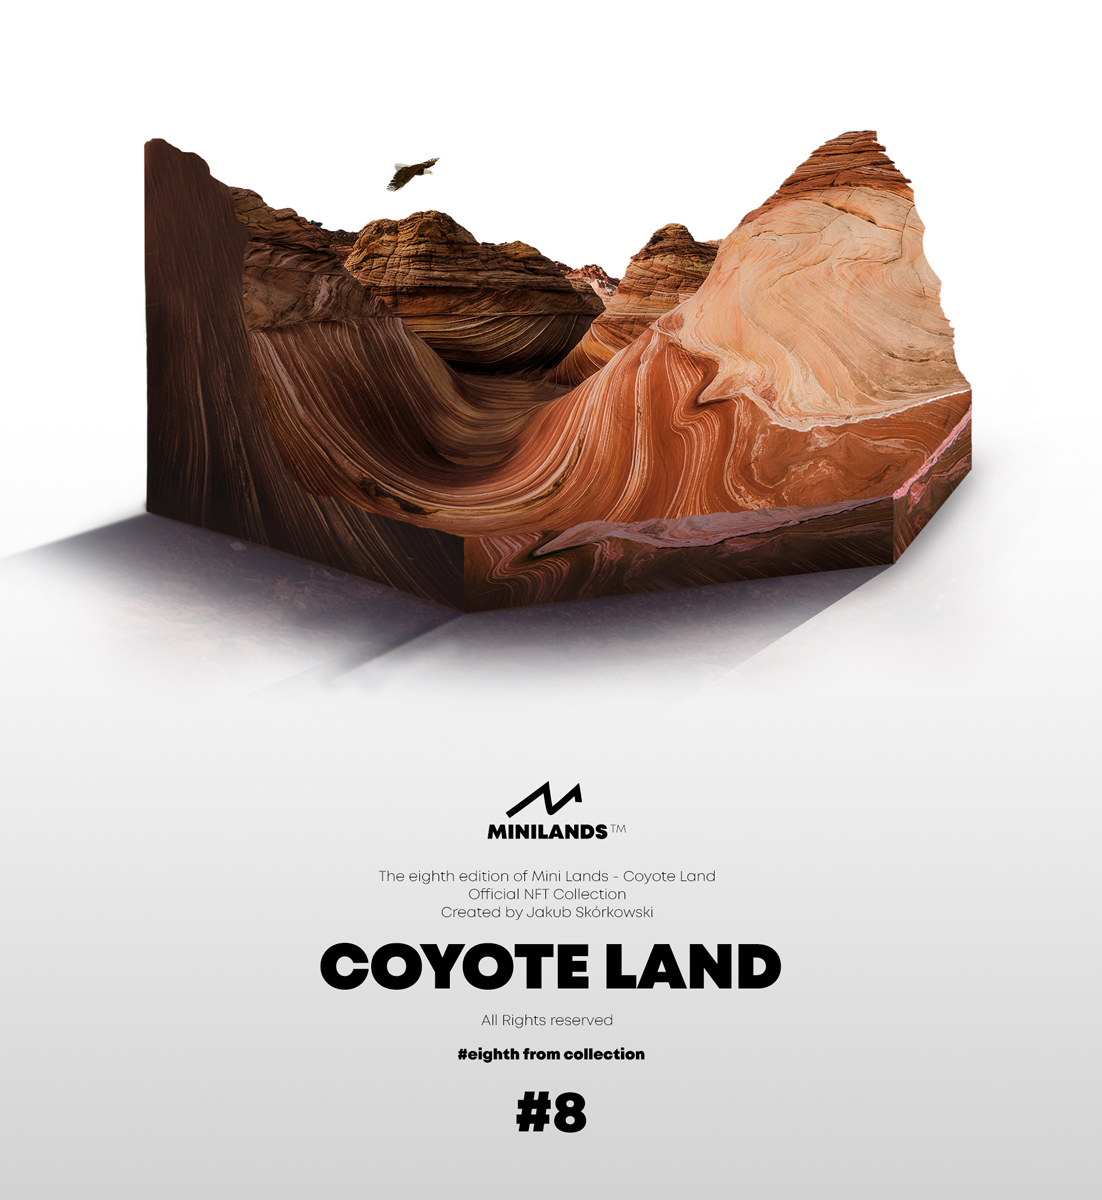 #8 COYOTE LAND